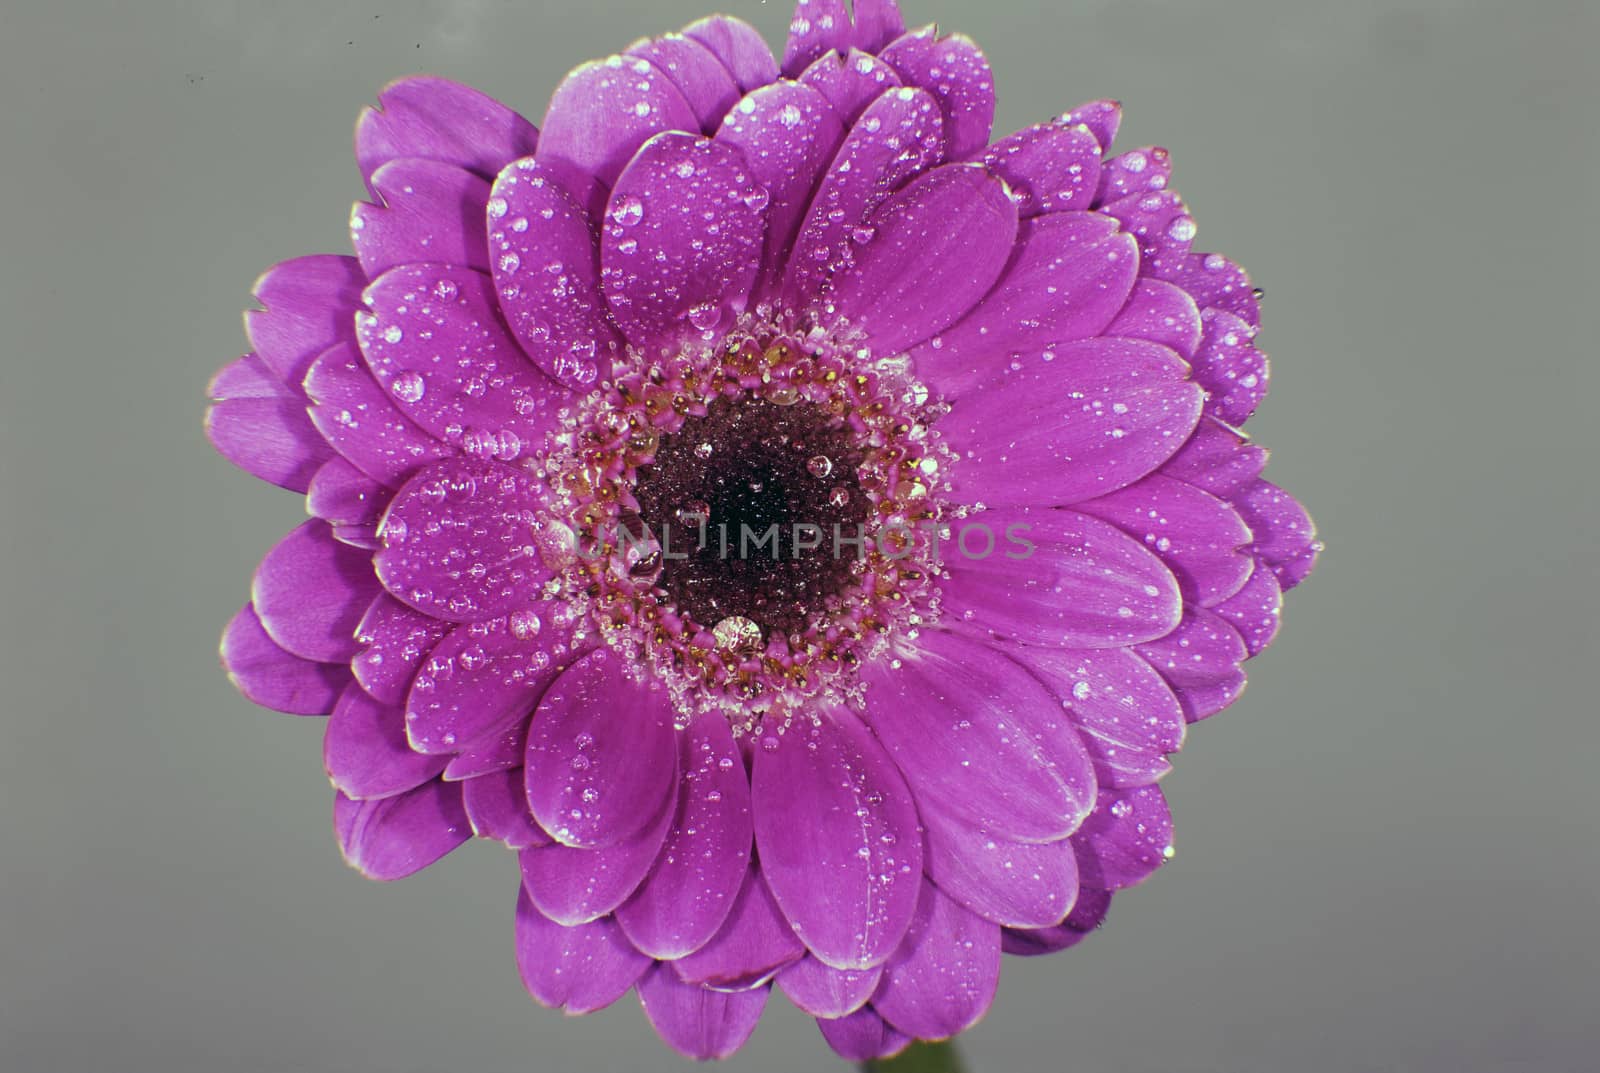 A flowerwith beutiful purple colors